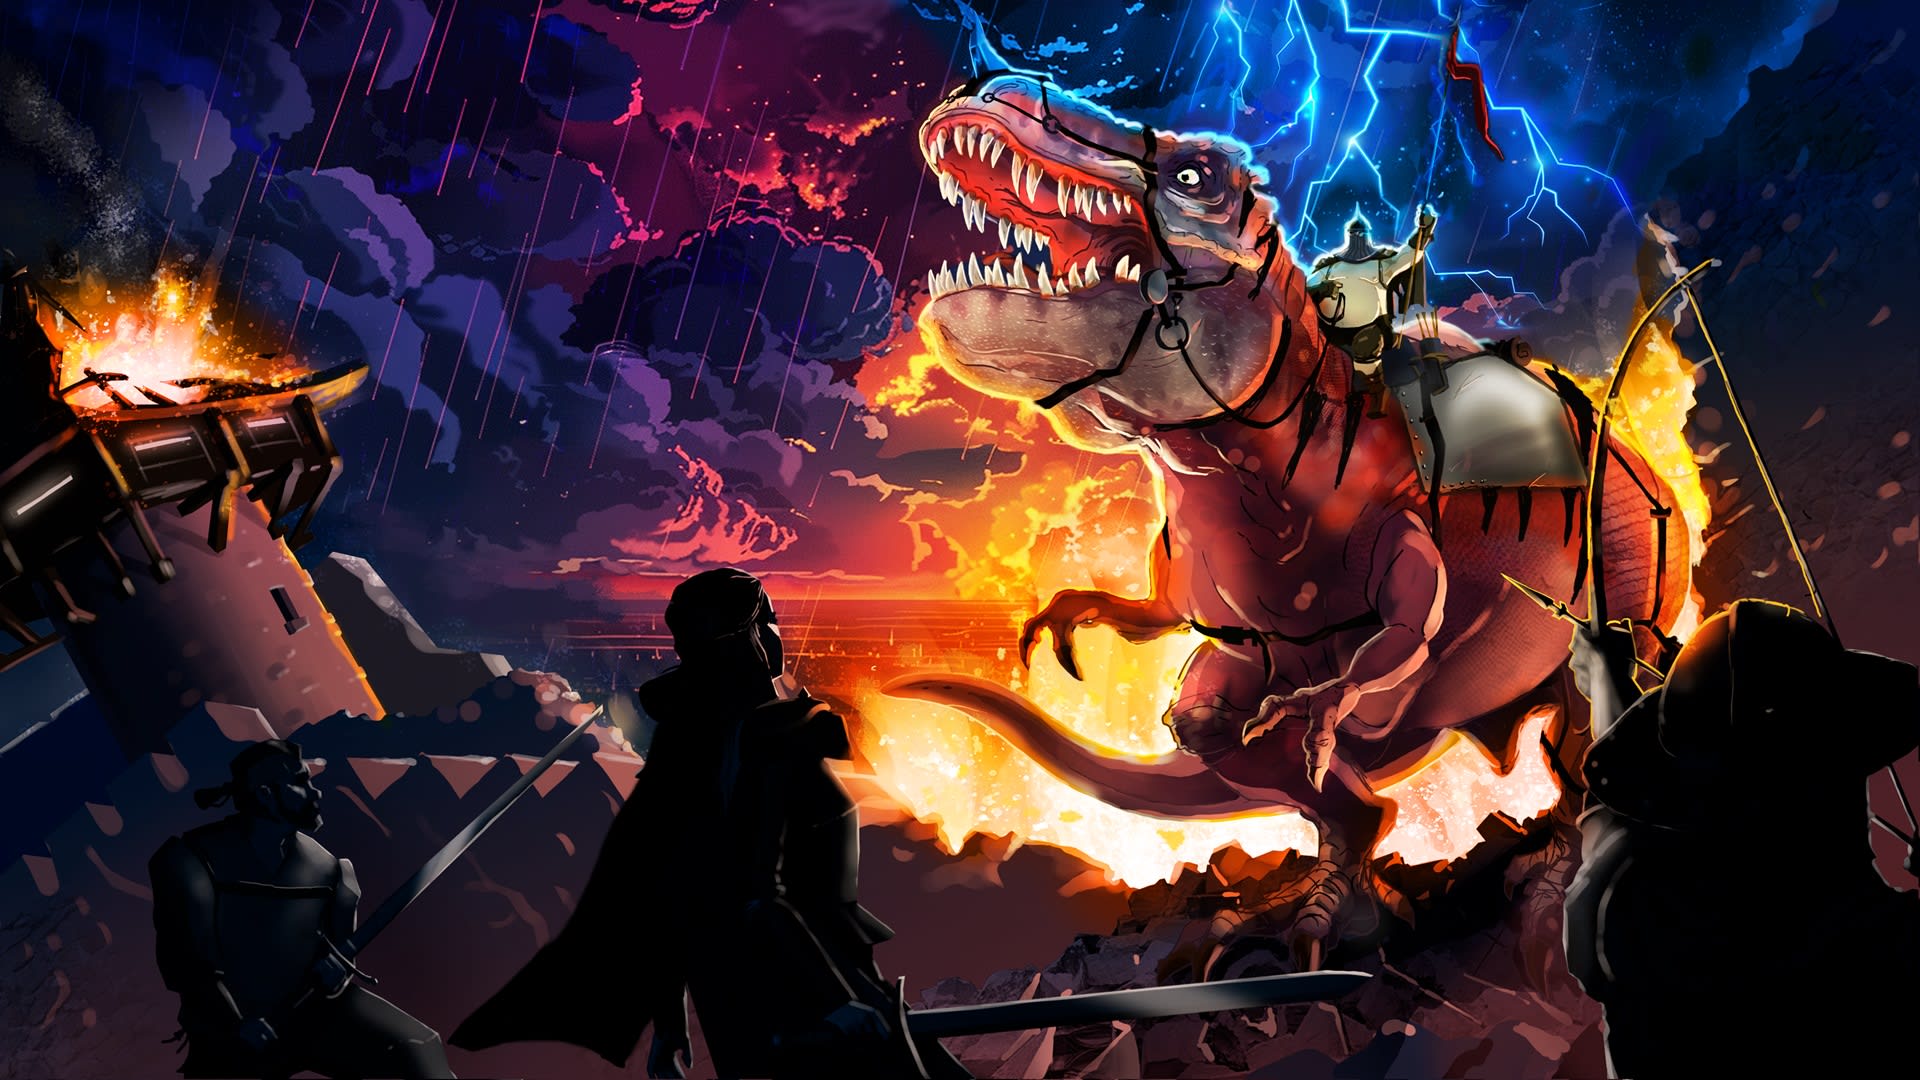 Dinolords poster showing a heavy metal inspired scene with a viking riding on a t-rex.